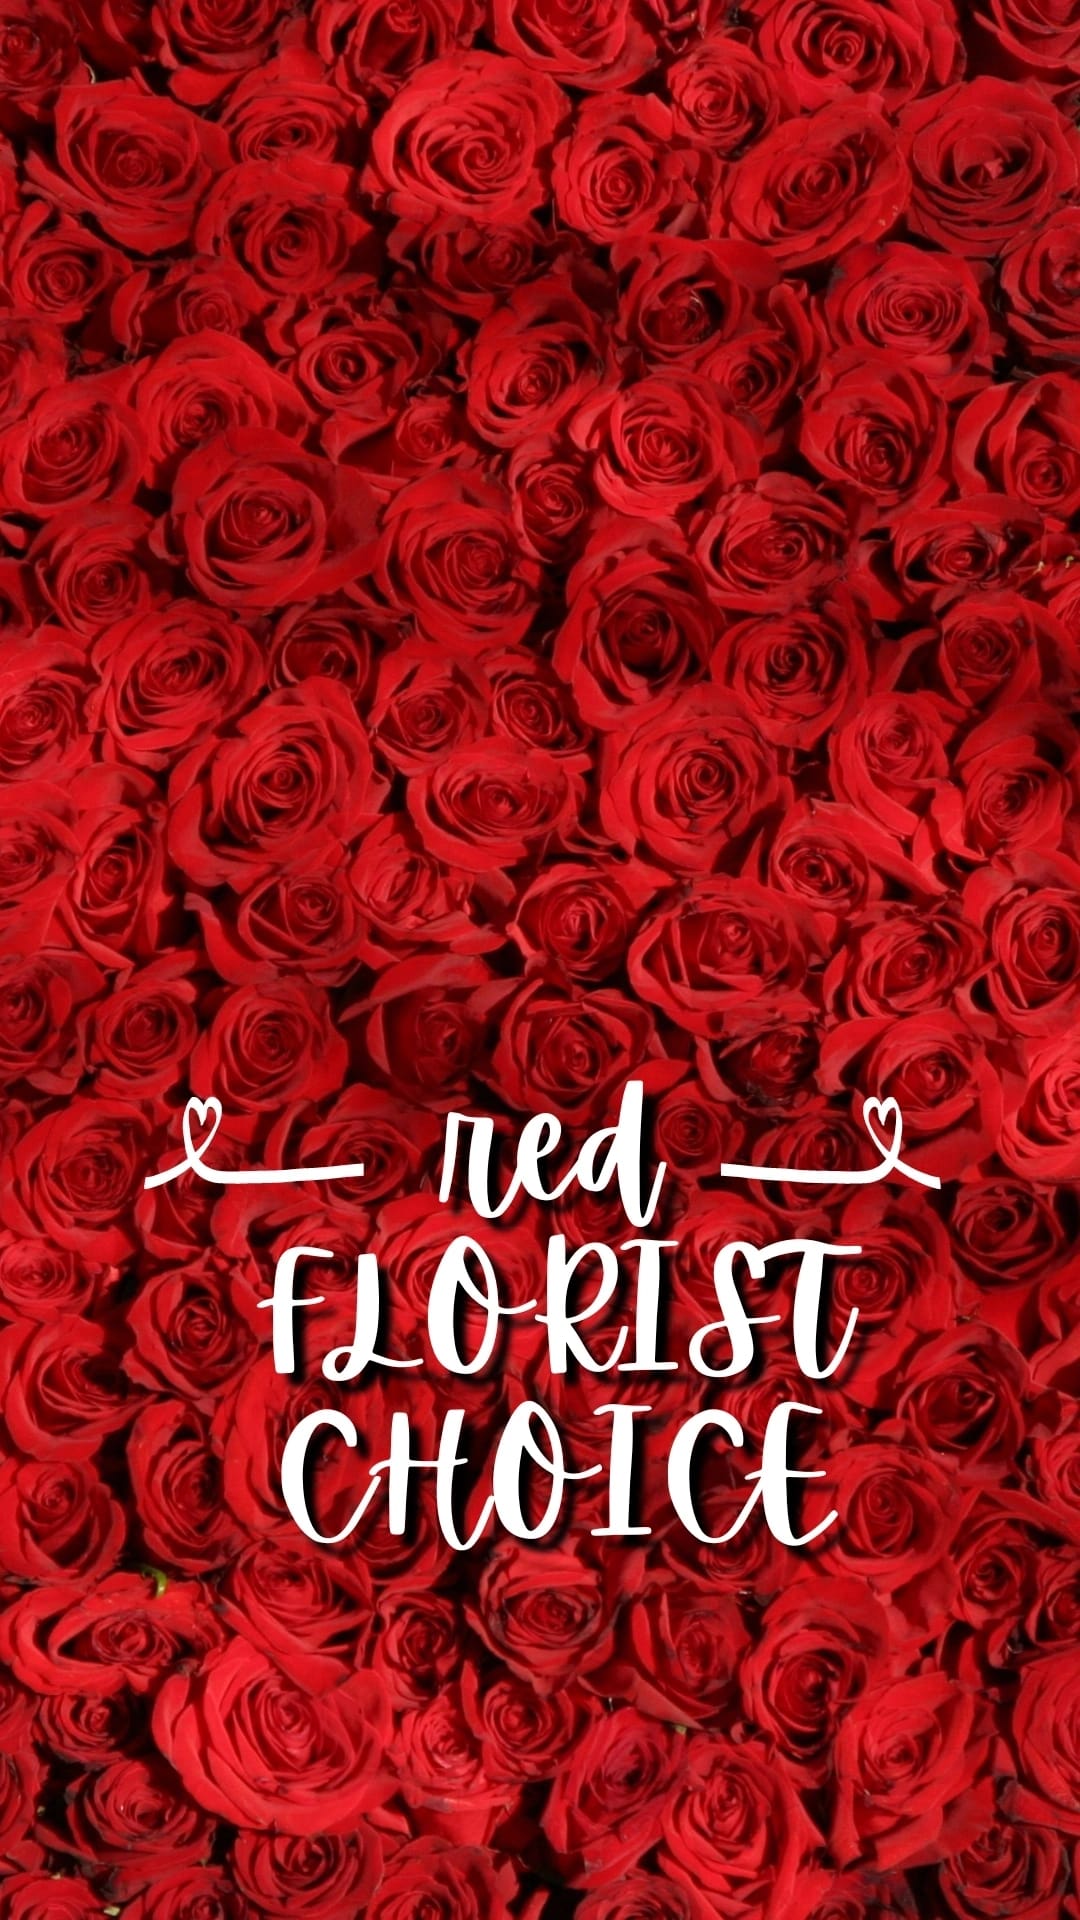 Red Florist Choice - Our red Florist’s Choice Bouquet is our quickest and best arrangement! Our expert florist will choose their best flowers to create a beautiful arrangement all for a great price! Send gorgeous shades of reds to your recipient today!